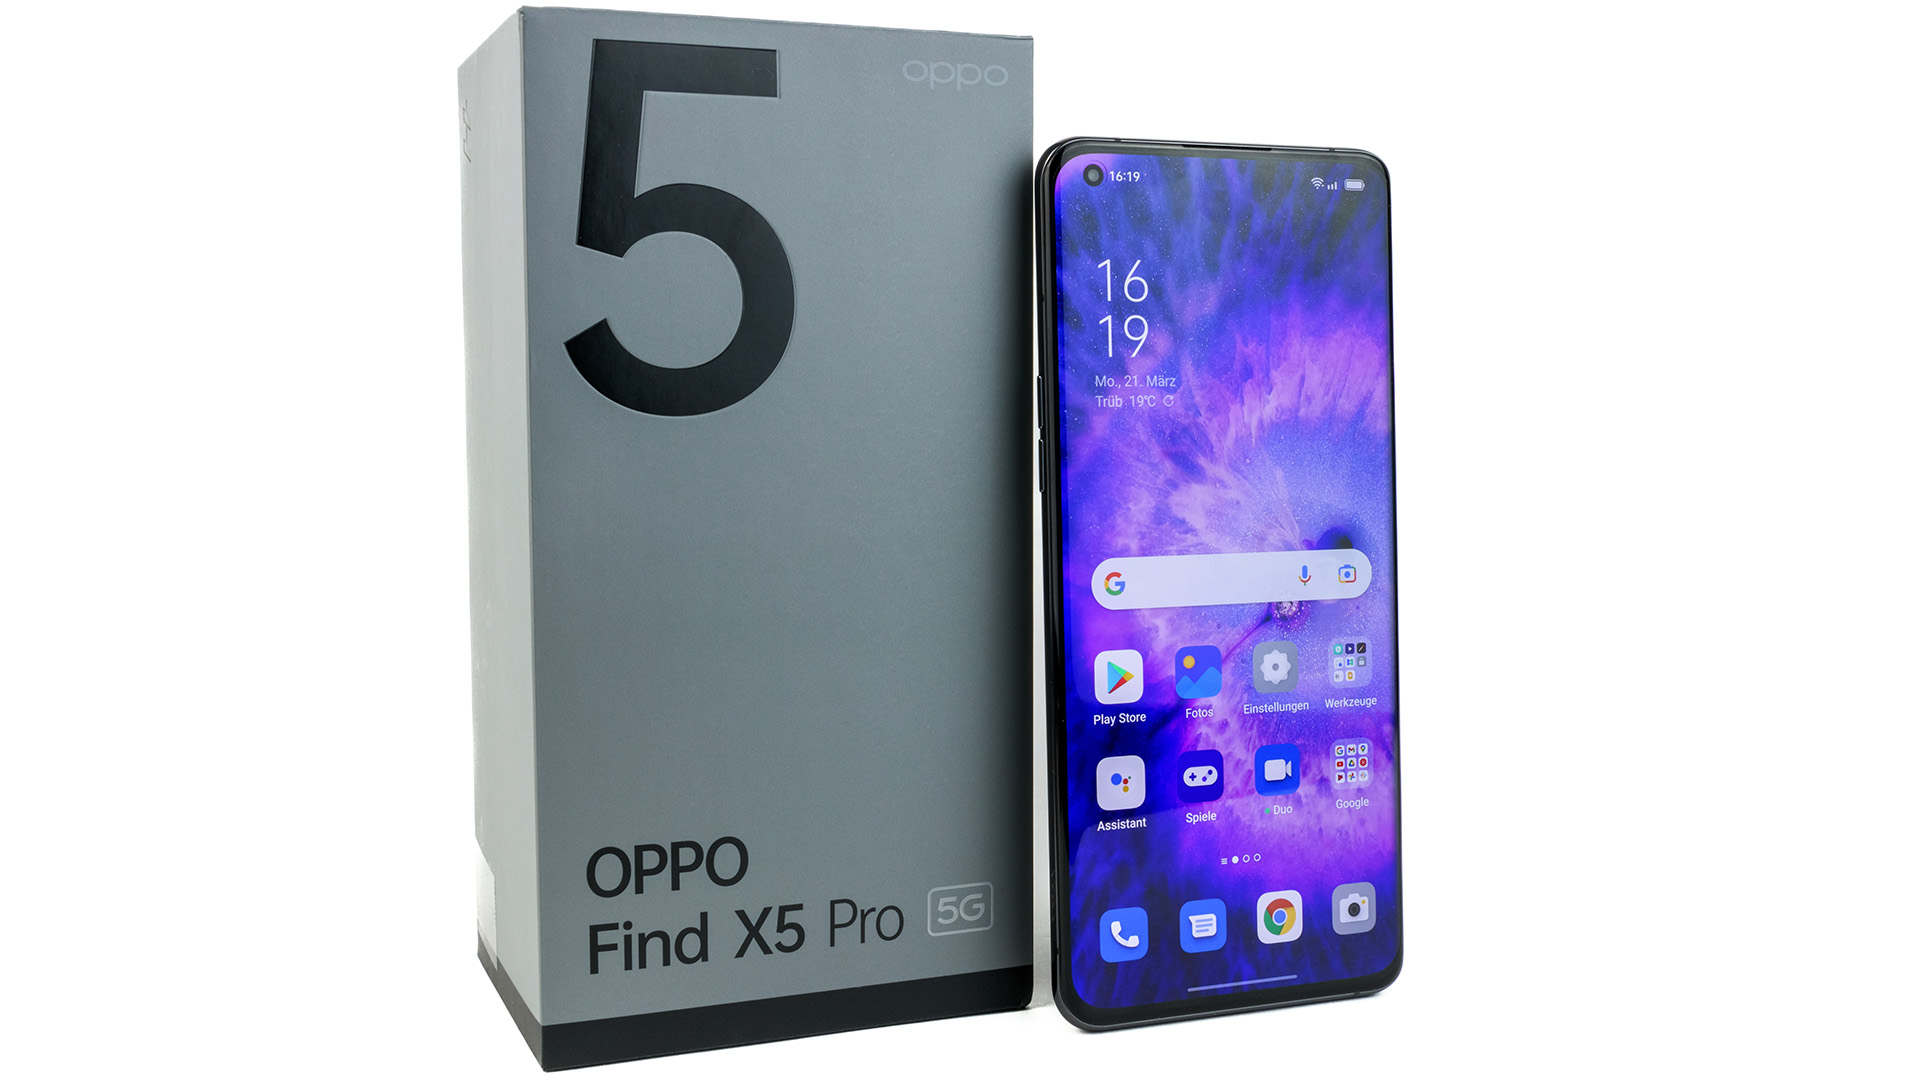 Oppo Find X5 Pro Review - Slick smartphone with a Hasselblad